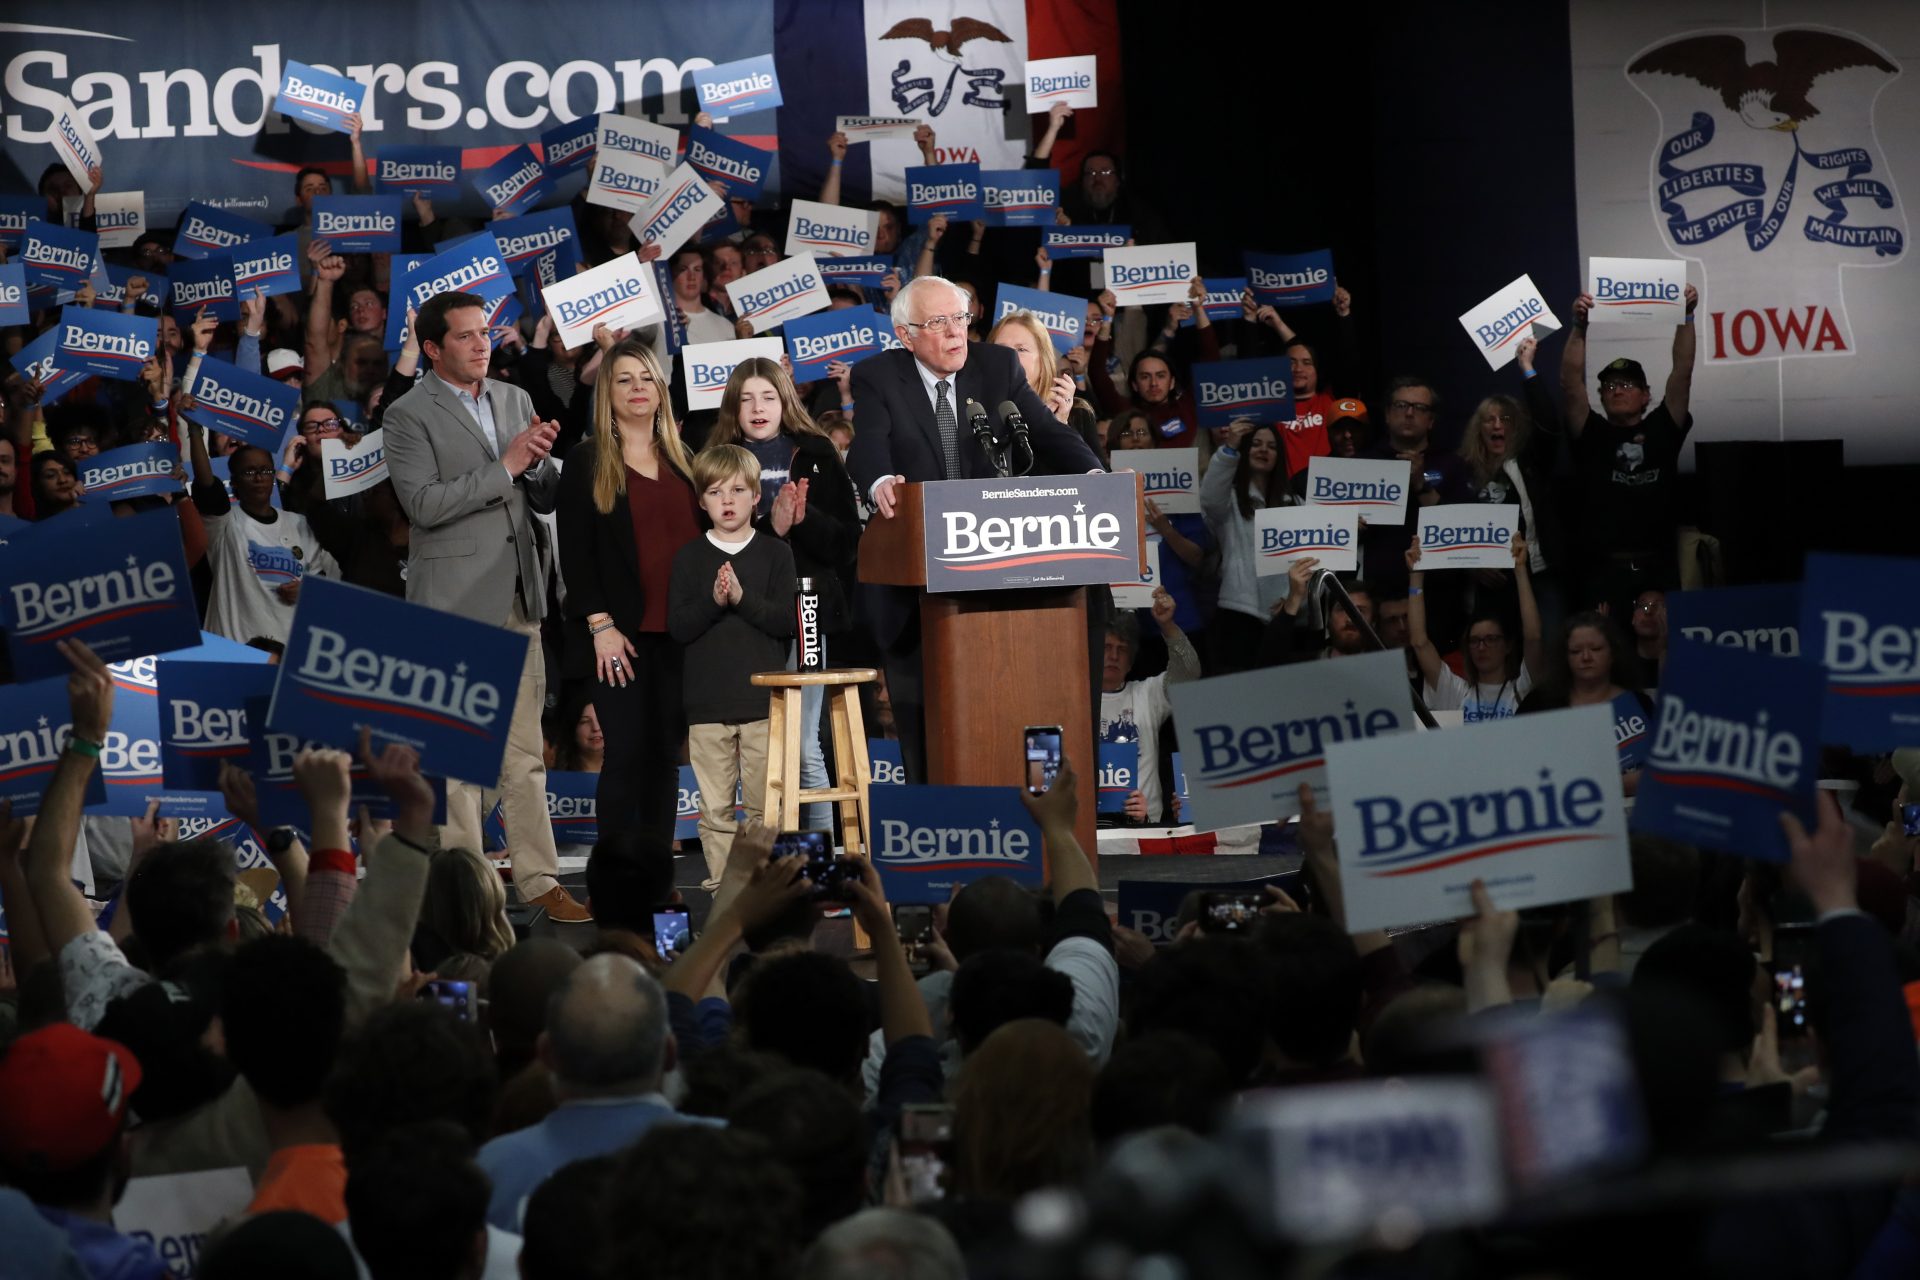 Democratic presidential candidate Sen. Bernie Sanders, I-Vt., accompanied by his family, speaks to supporters at a caucus night campaign rally in Des Moines, Iowa, Monday, Feb. 3, 2020.